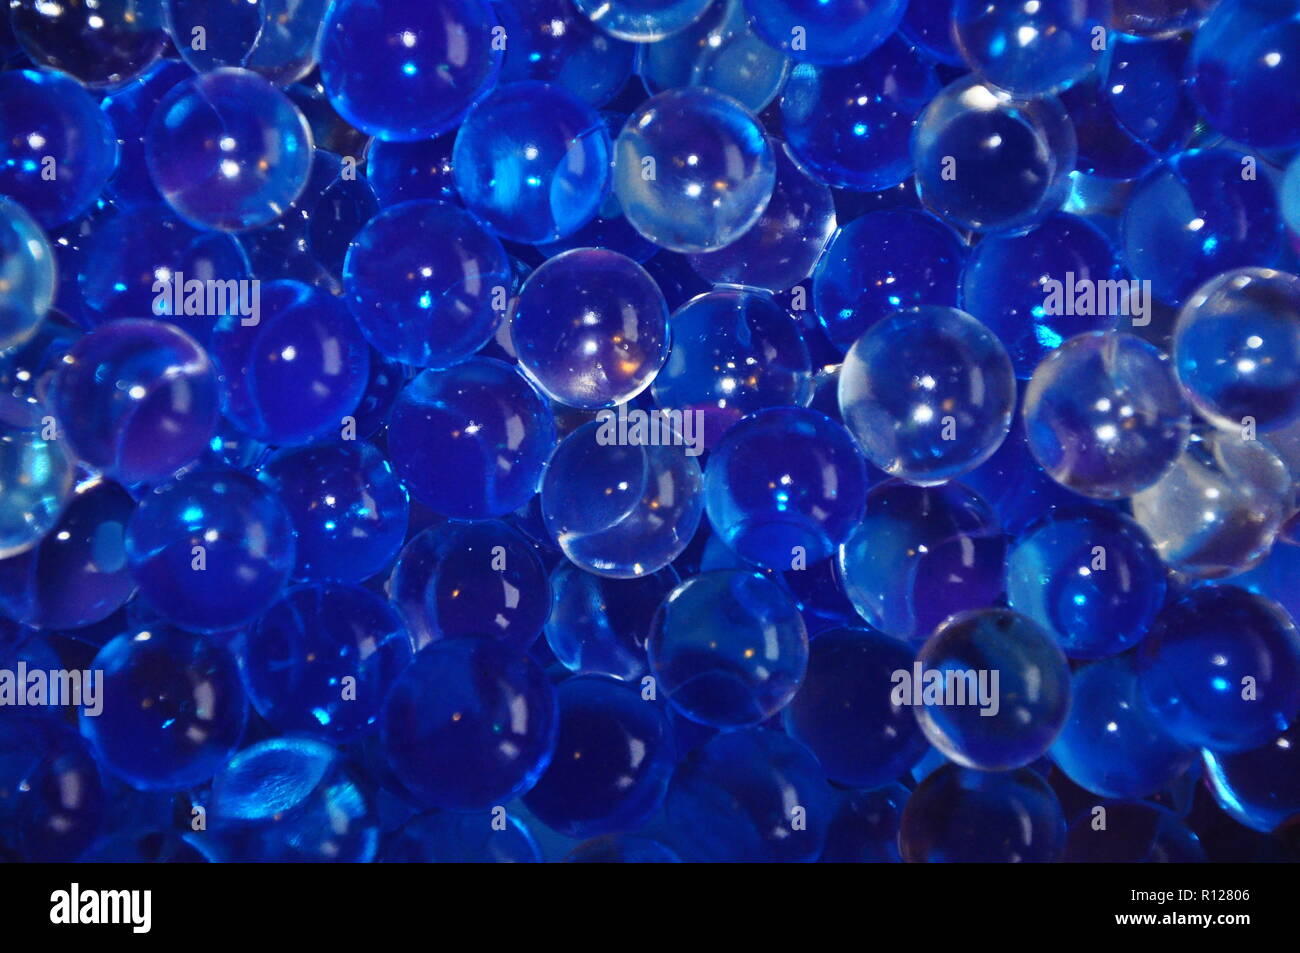 Gel bubbles blue colored on dark blue background Stock Photo